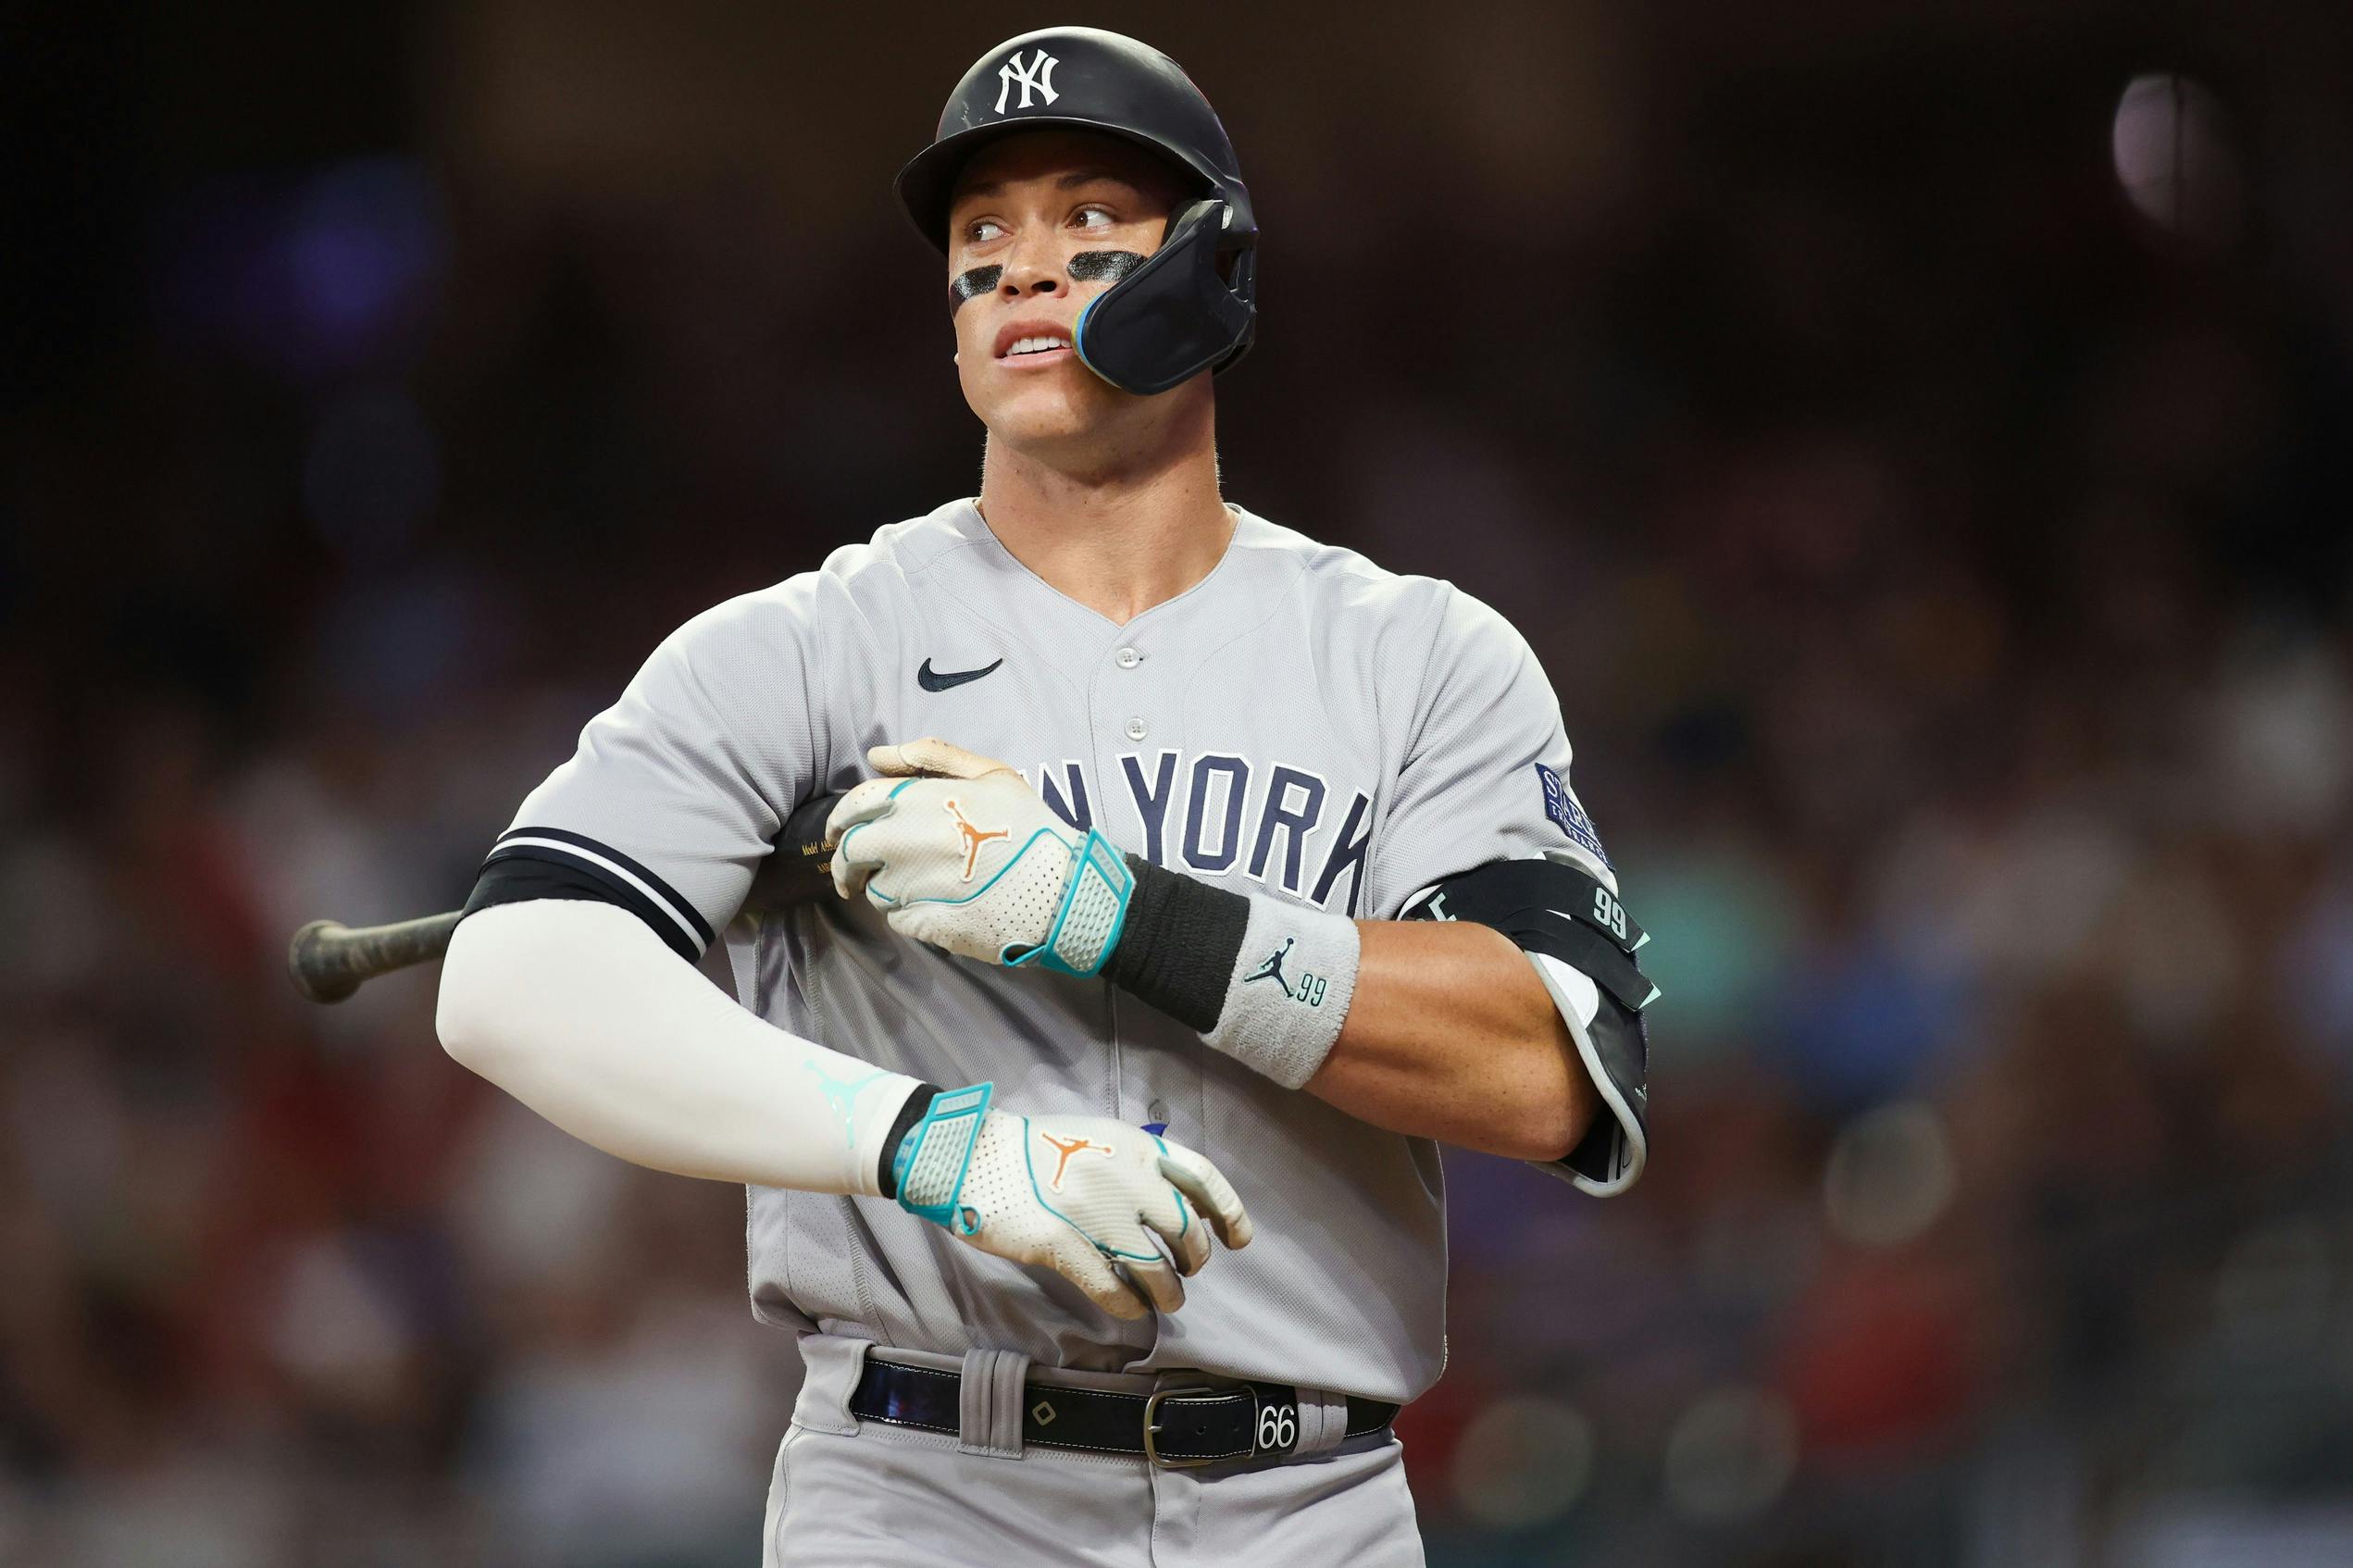 Yankees eliminated from postseason contention for first time since